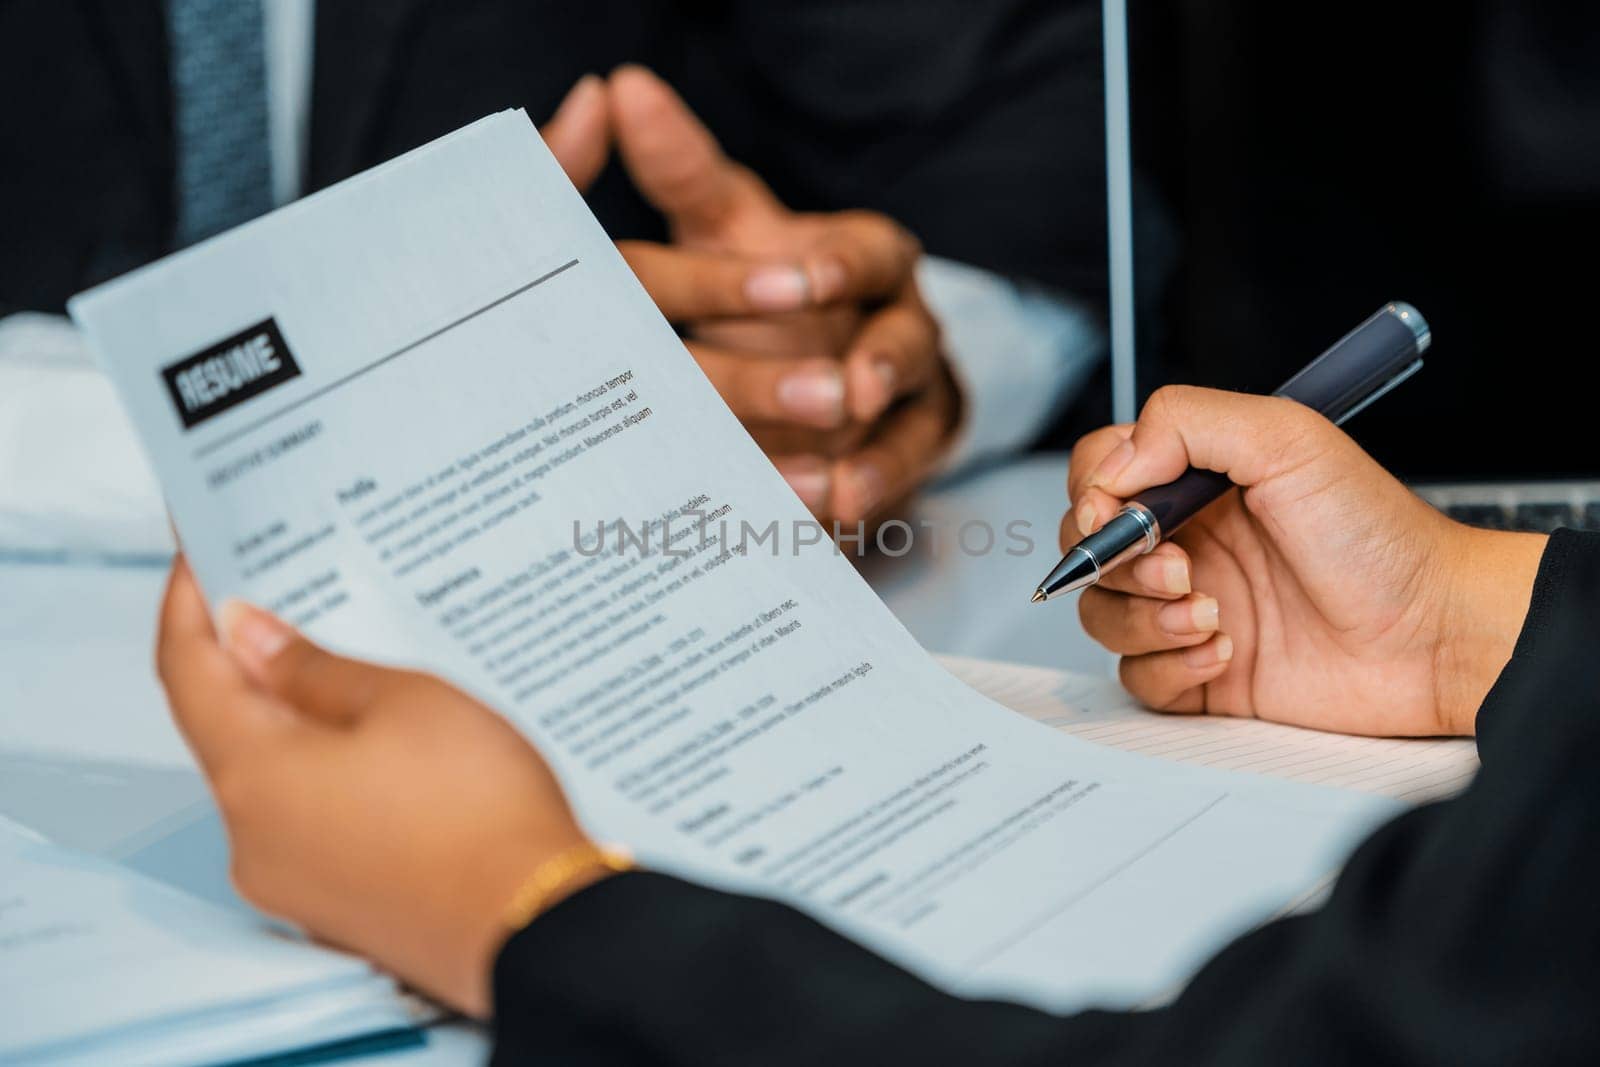 Human resources department manager reads CV resume document of an employee candidate at interview room. Job application, recruit and labor hiring concept. uds